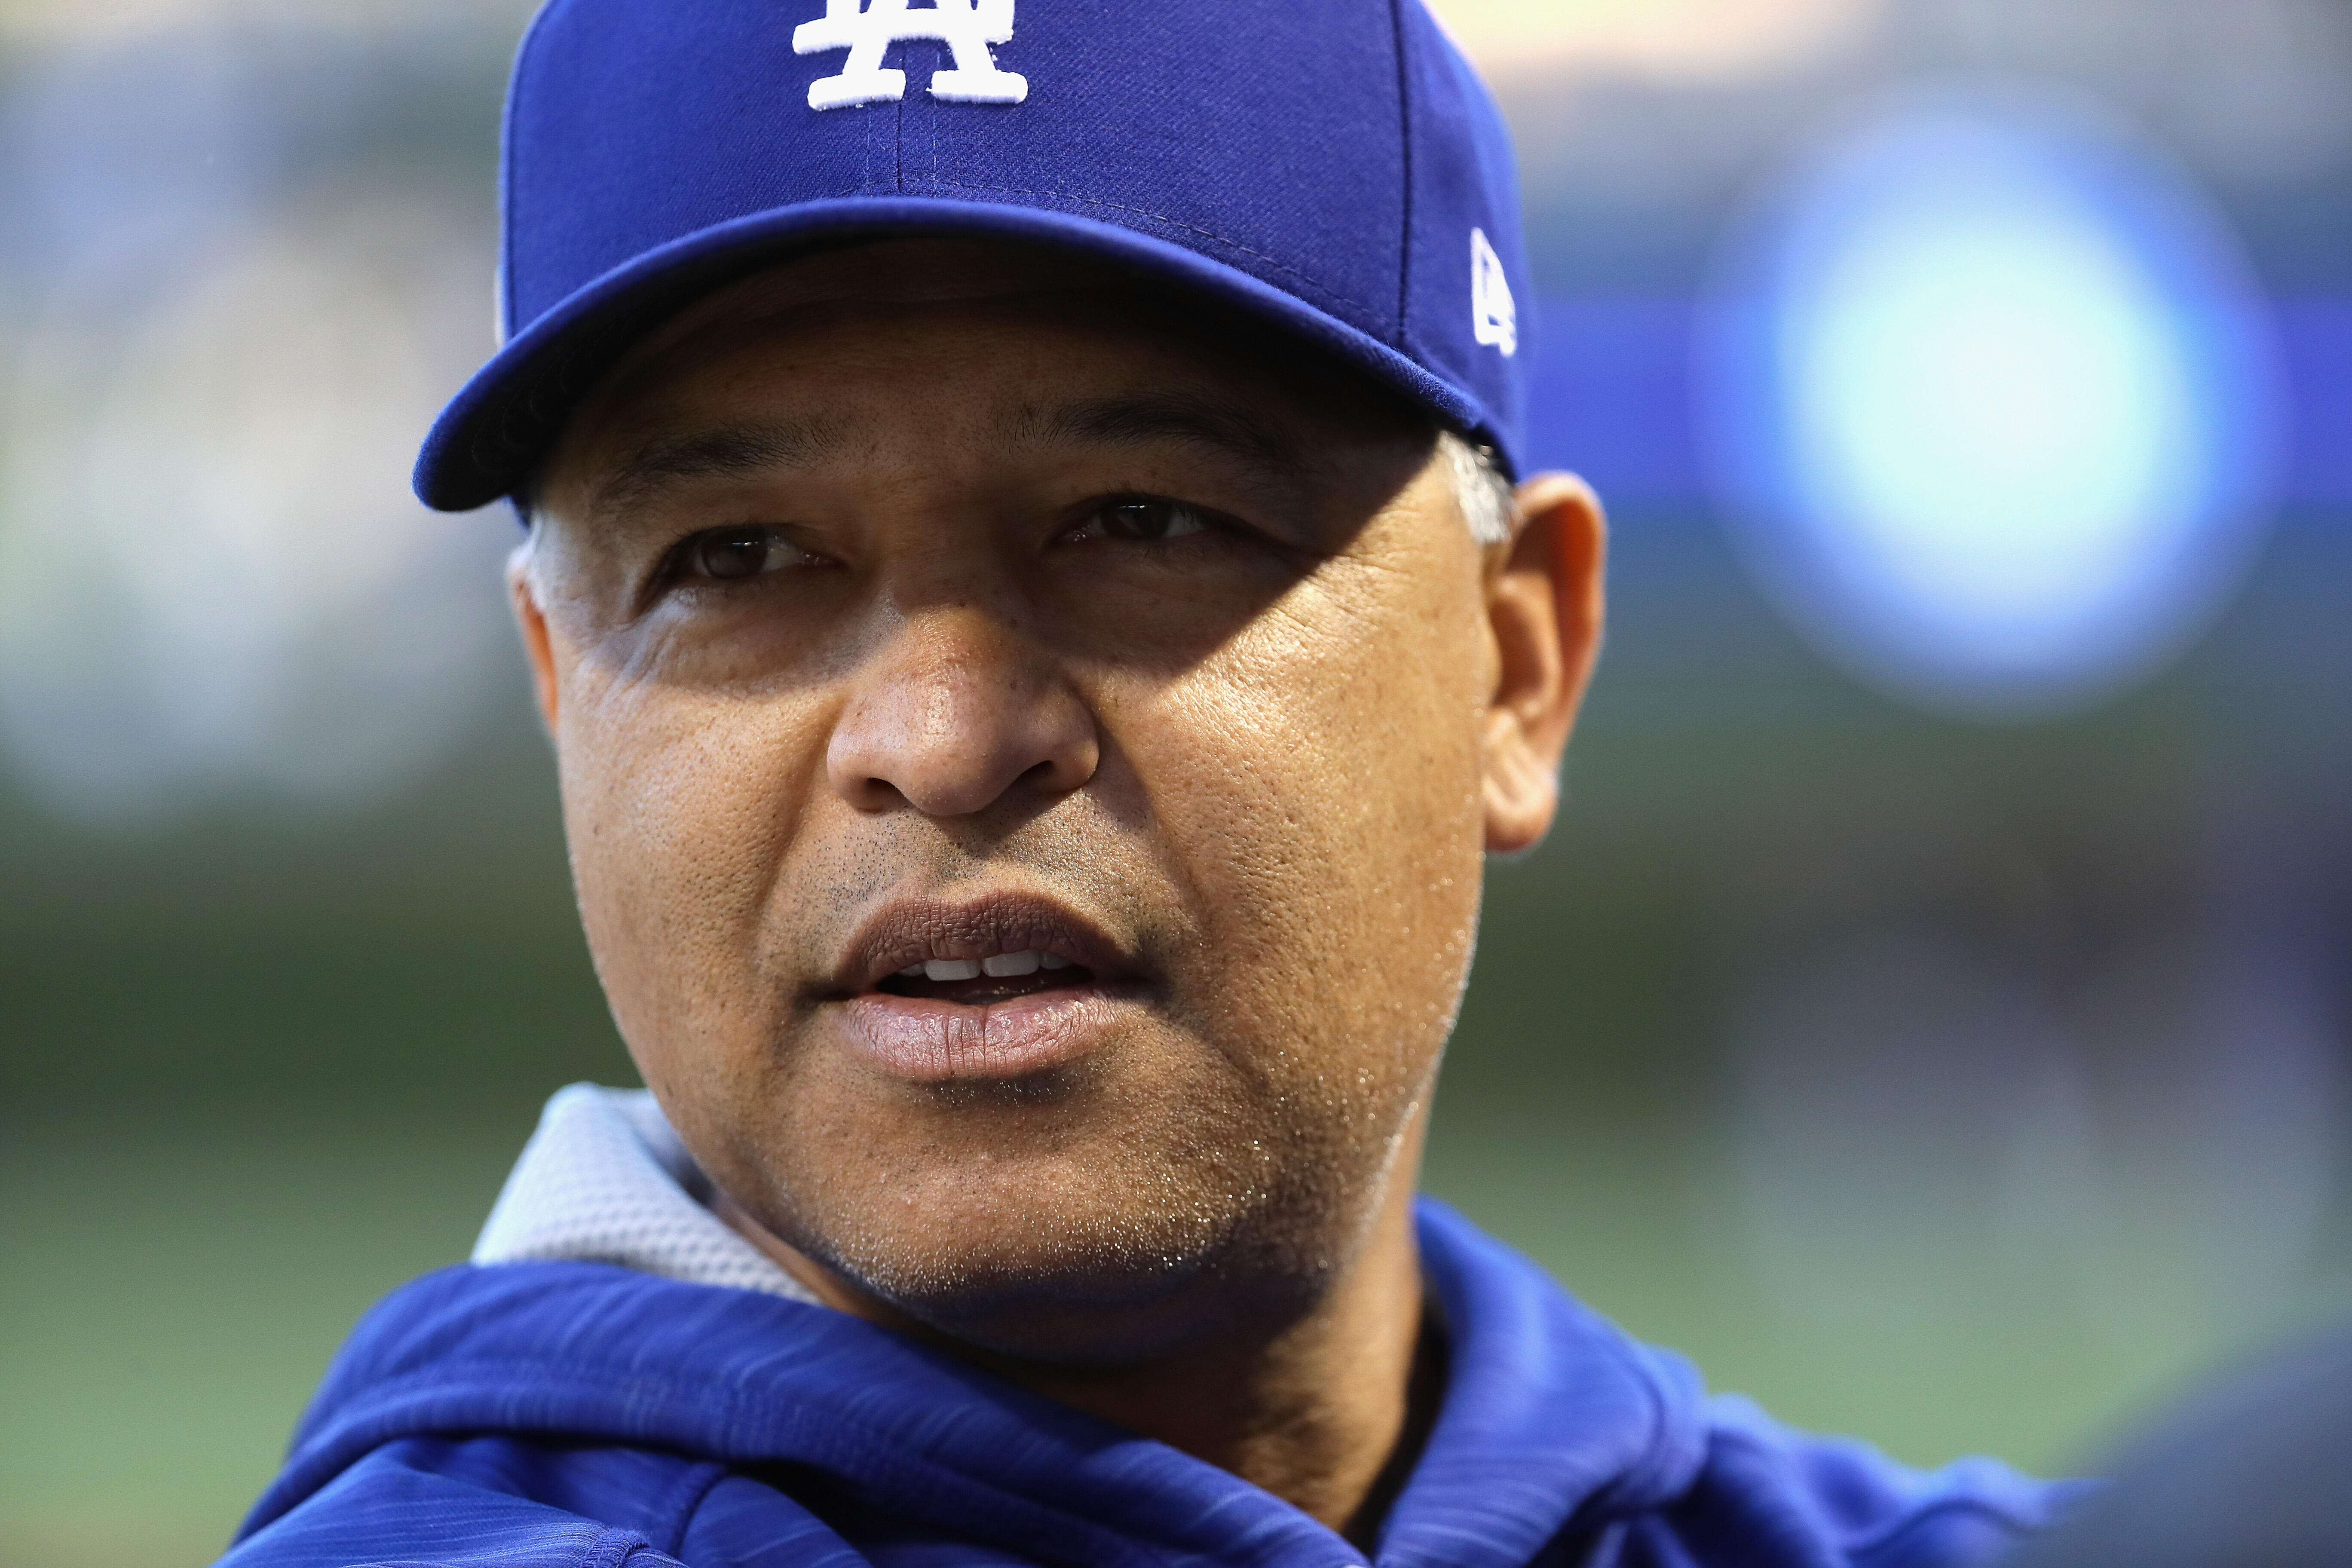 CHICAGO, IL - OCTOBER 22:  Manager Dave Roberts of the Los Angeles Dodgers looks on prior to game six of the National League Championship Series against the Chicago Cubs at Wrigley Field on October 22, 2016 in Chicago, Illinois.  (Photo by Jonathan Daniel